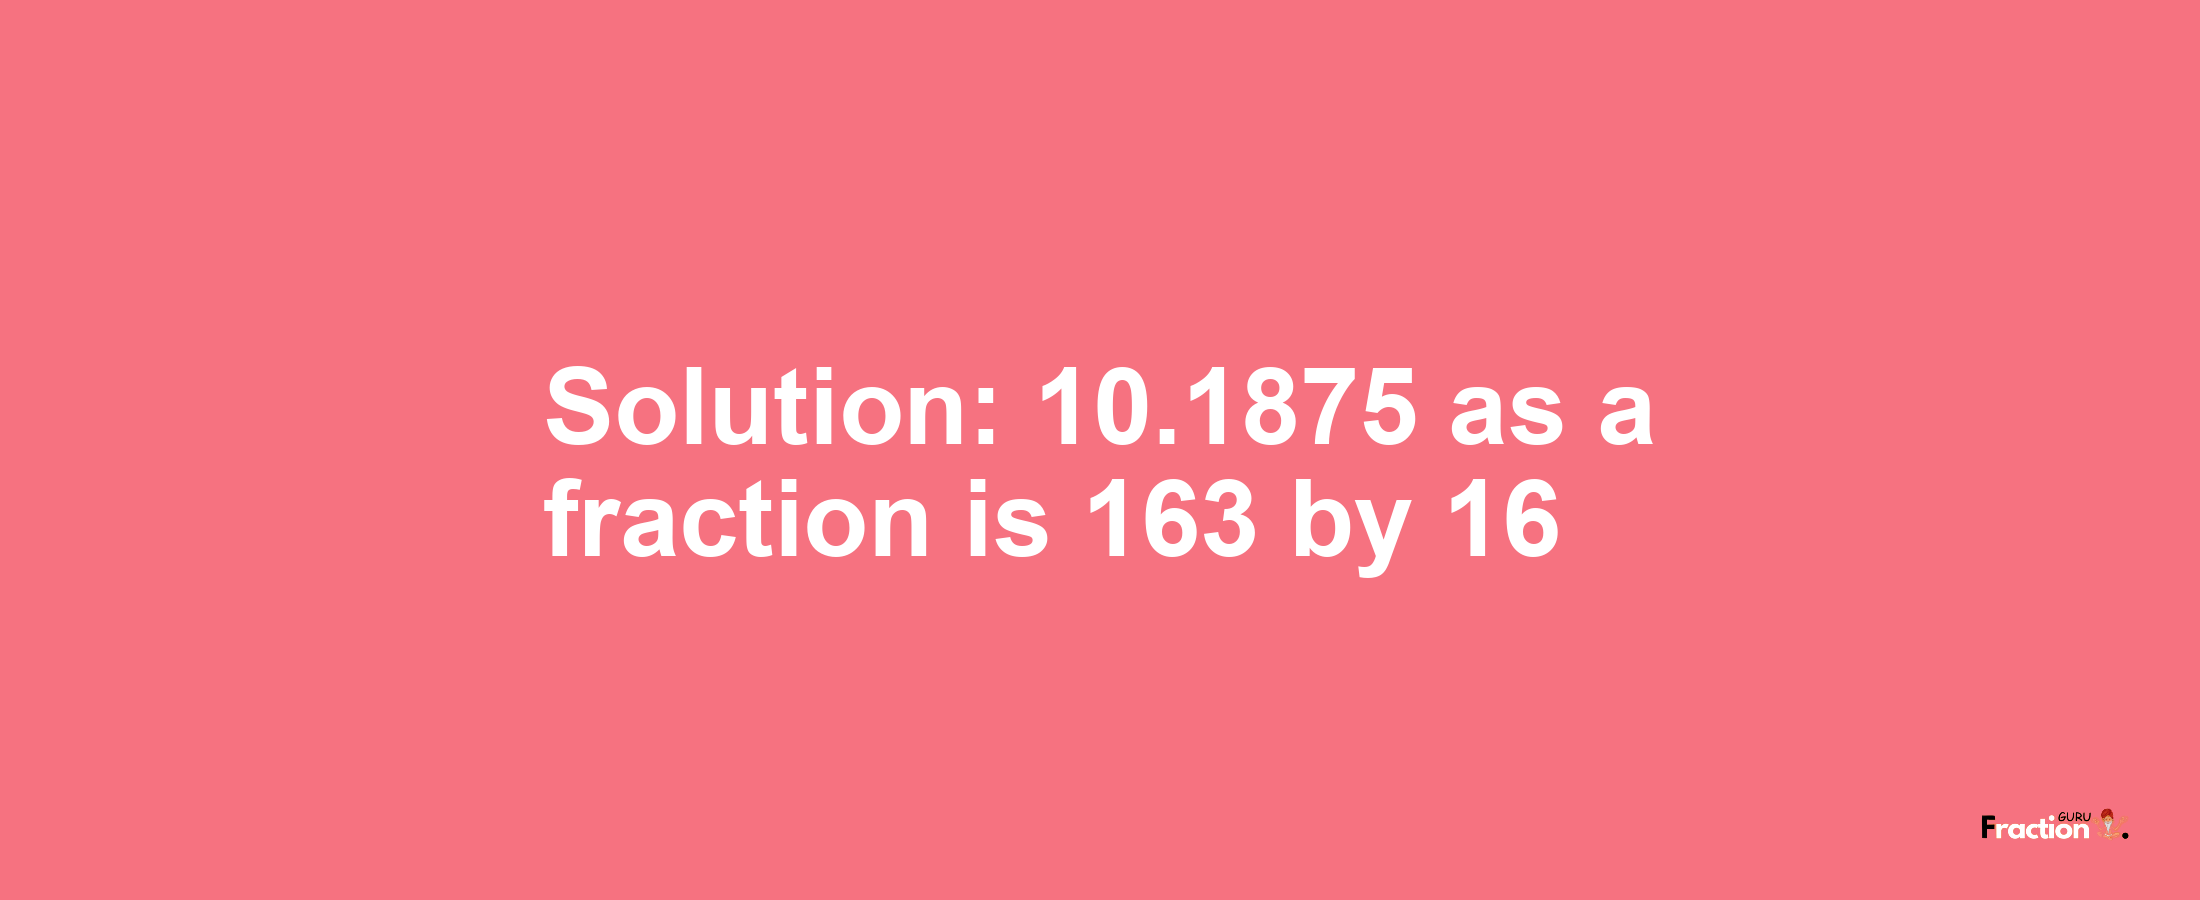 Solution:10.1875 as a fraction is 163/16